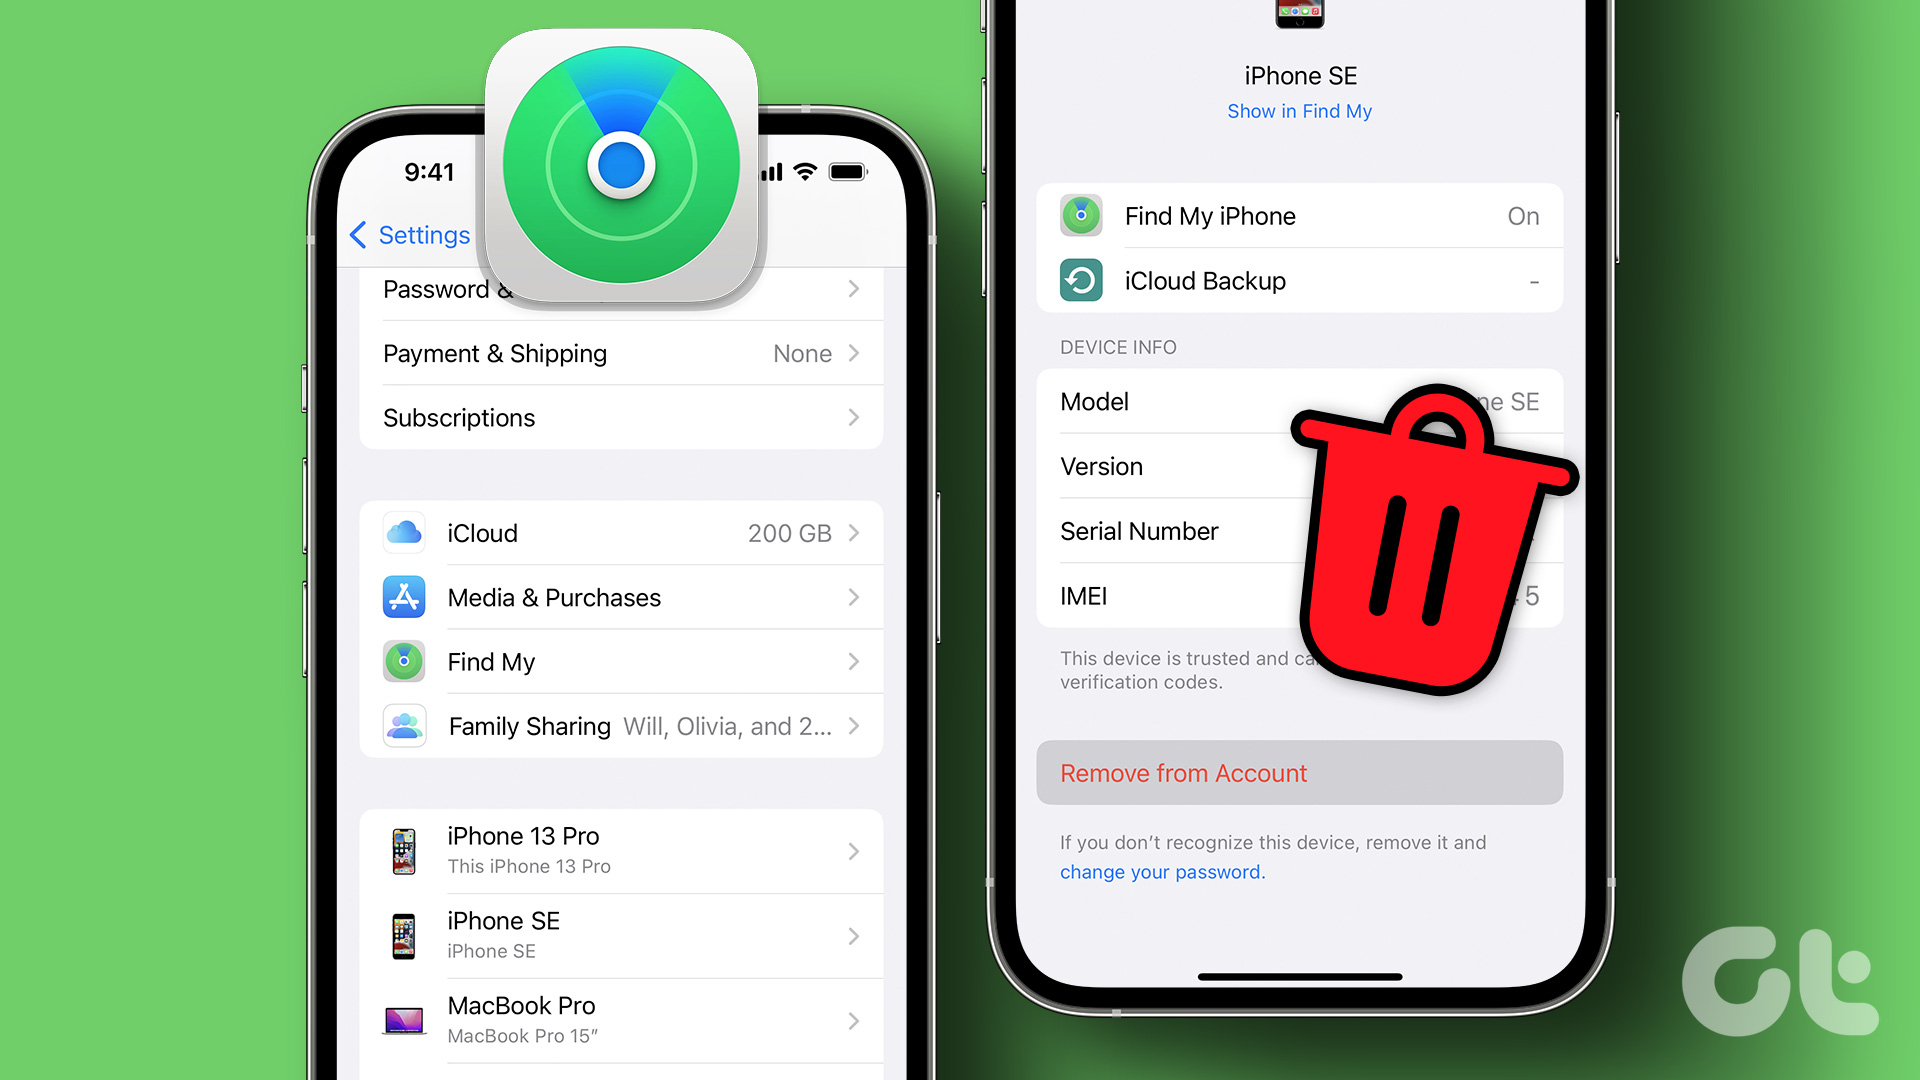 How to Remove Devices From Find My